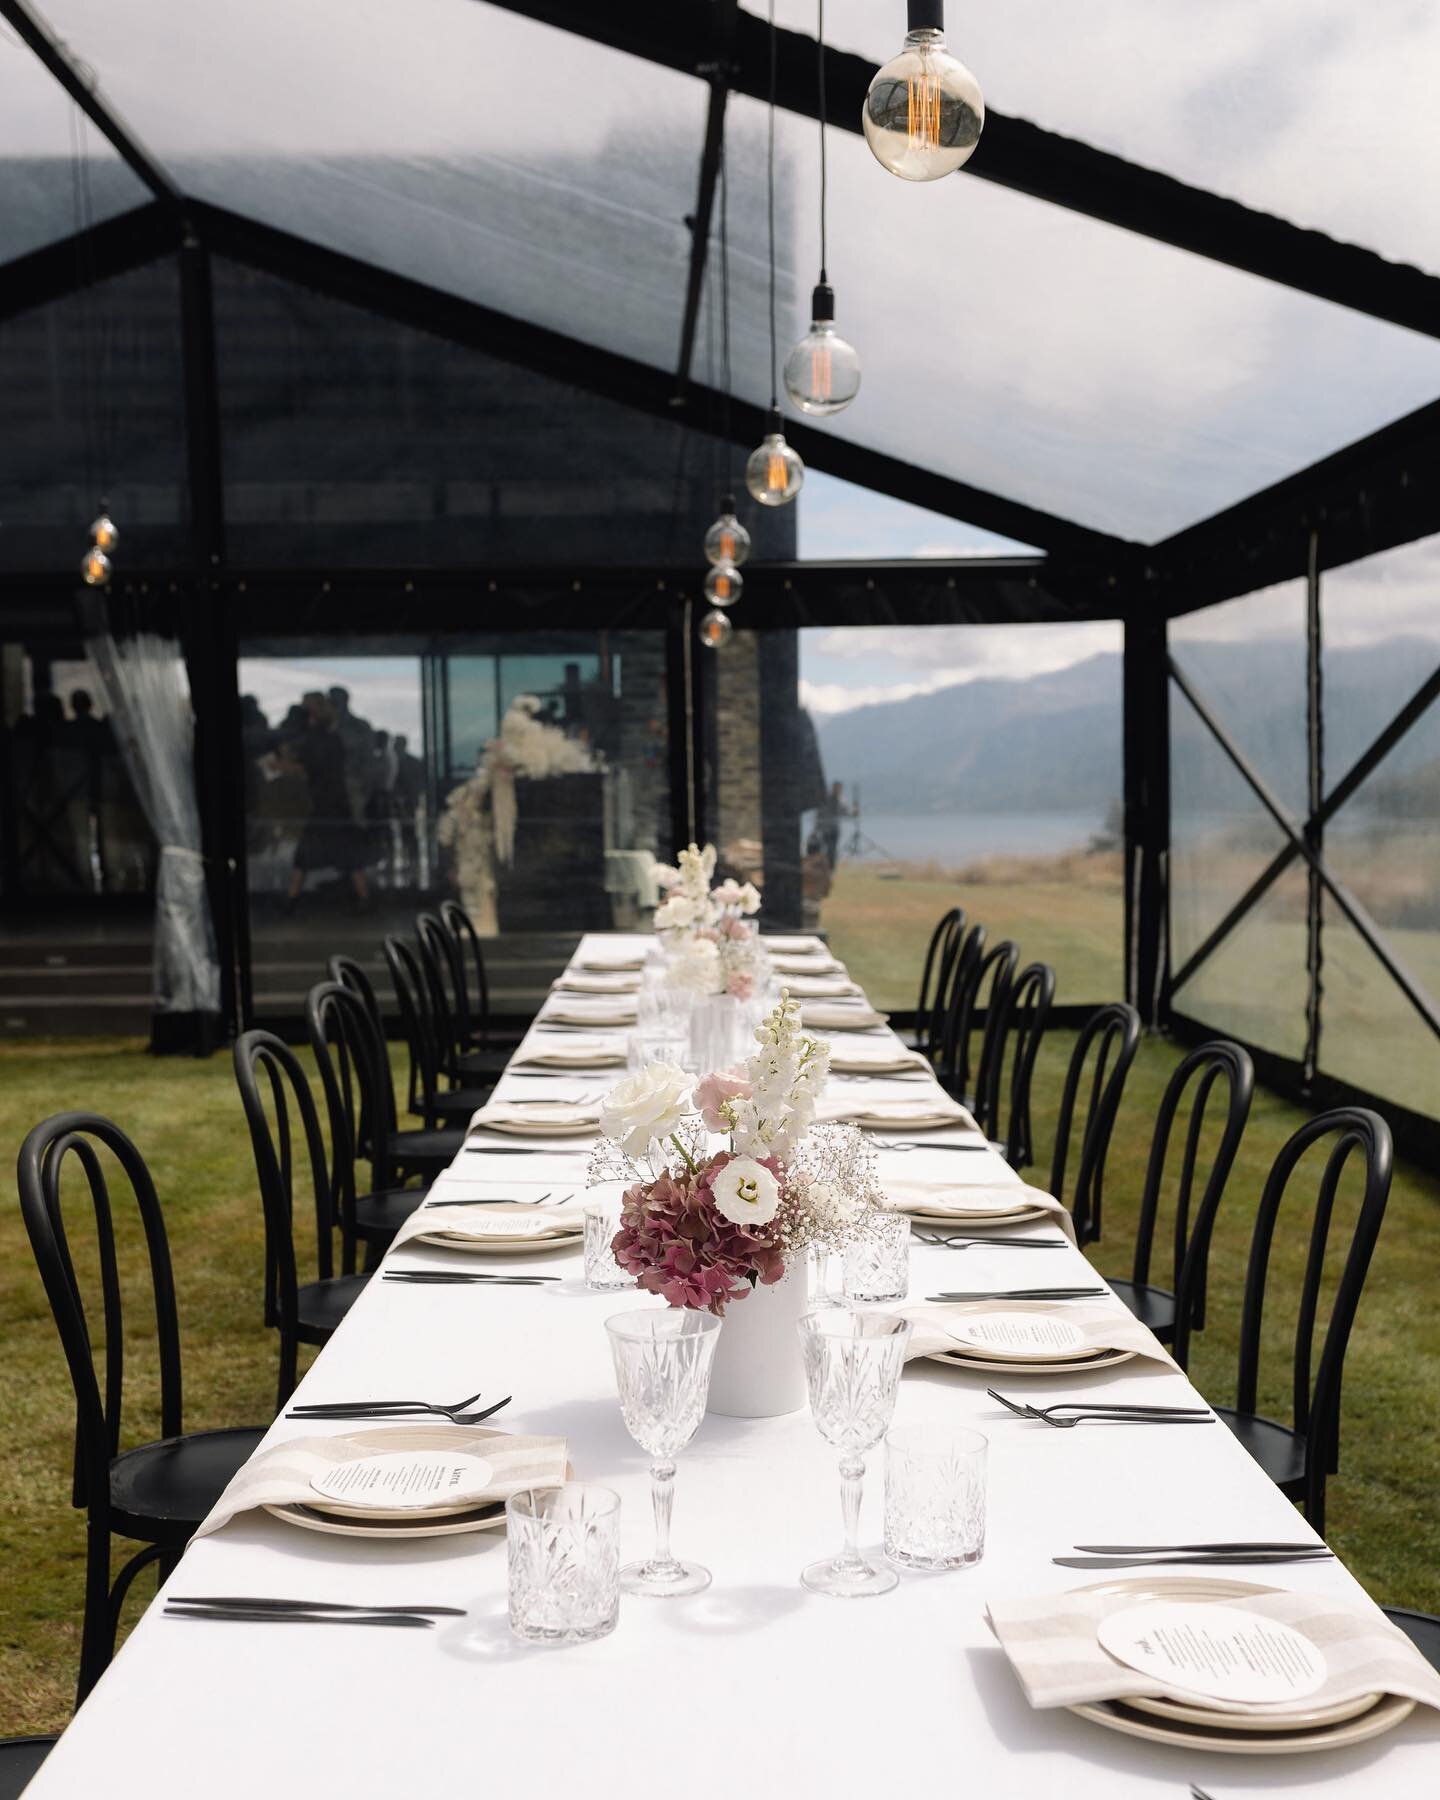 Our Alps Edition Marquee looking sleek + beautiful Lake Wakatipu making an appearance in the background.

The dream team behind this magic // @onefinedayweddings ~ styling &amp; planning @allbunchedup_ ~ florals @visualeventsqueenstown ~ lighting and